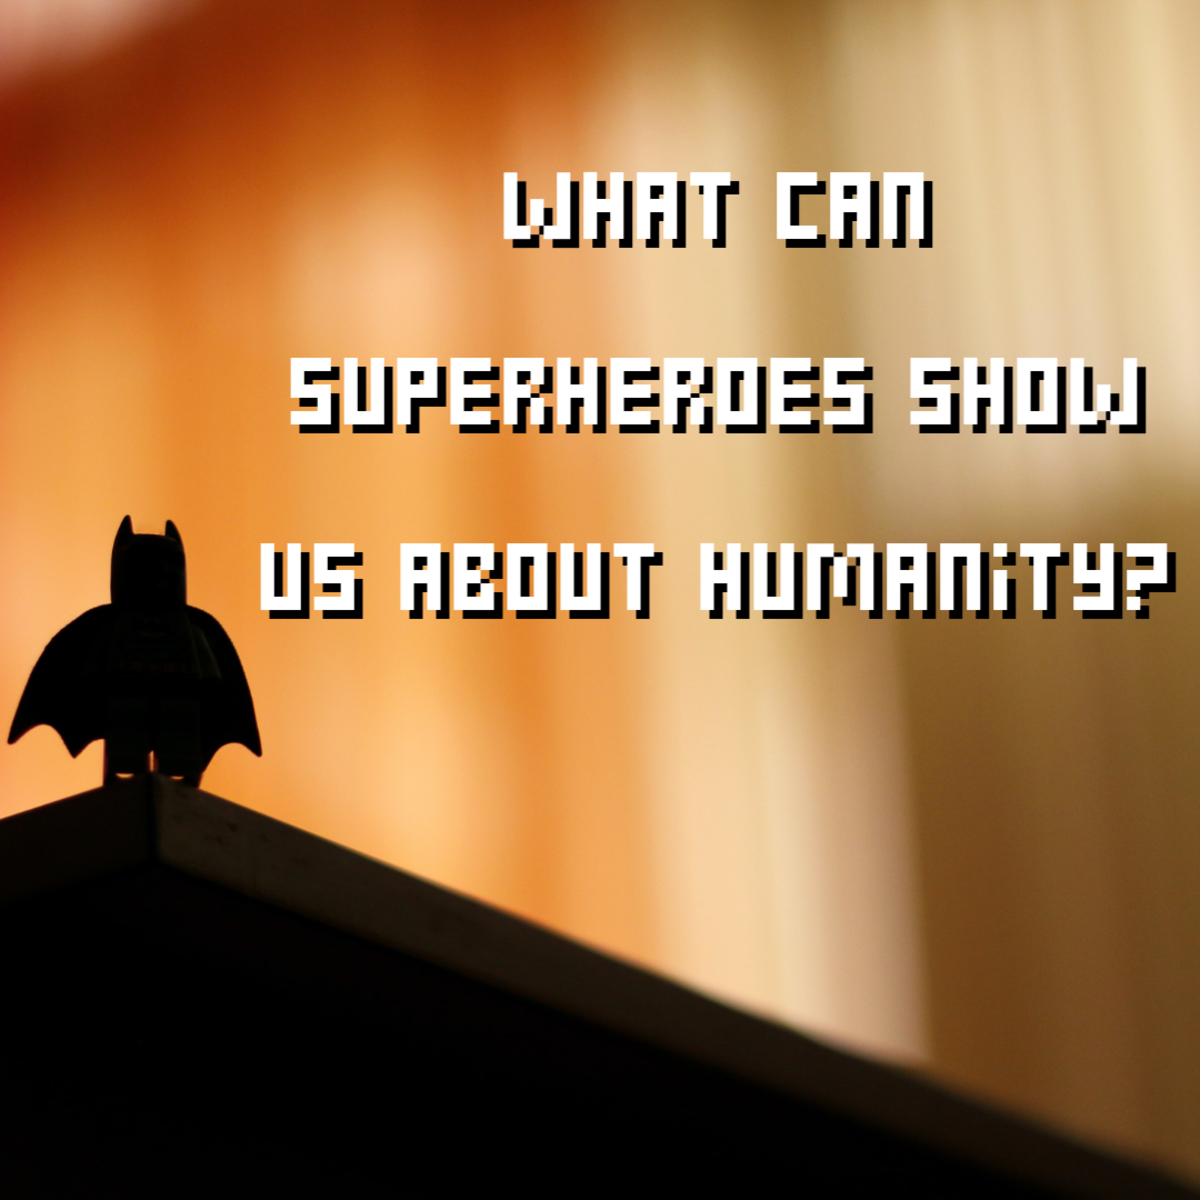 Read on to learn all about what superheroes can show us about humanity. They are all part of a modern mythology.